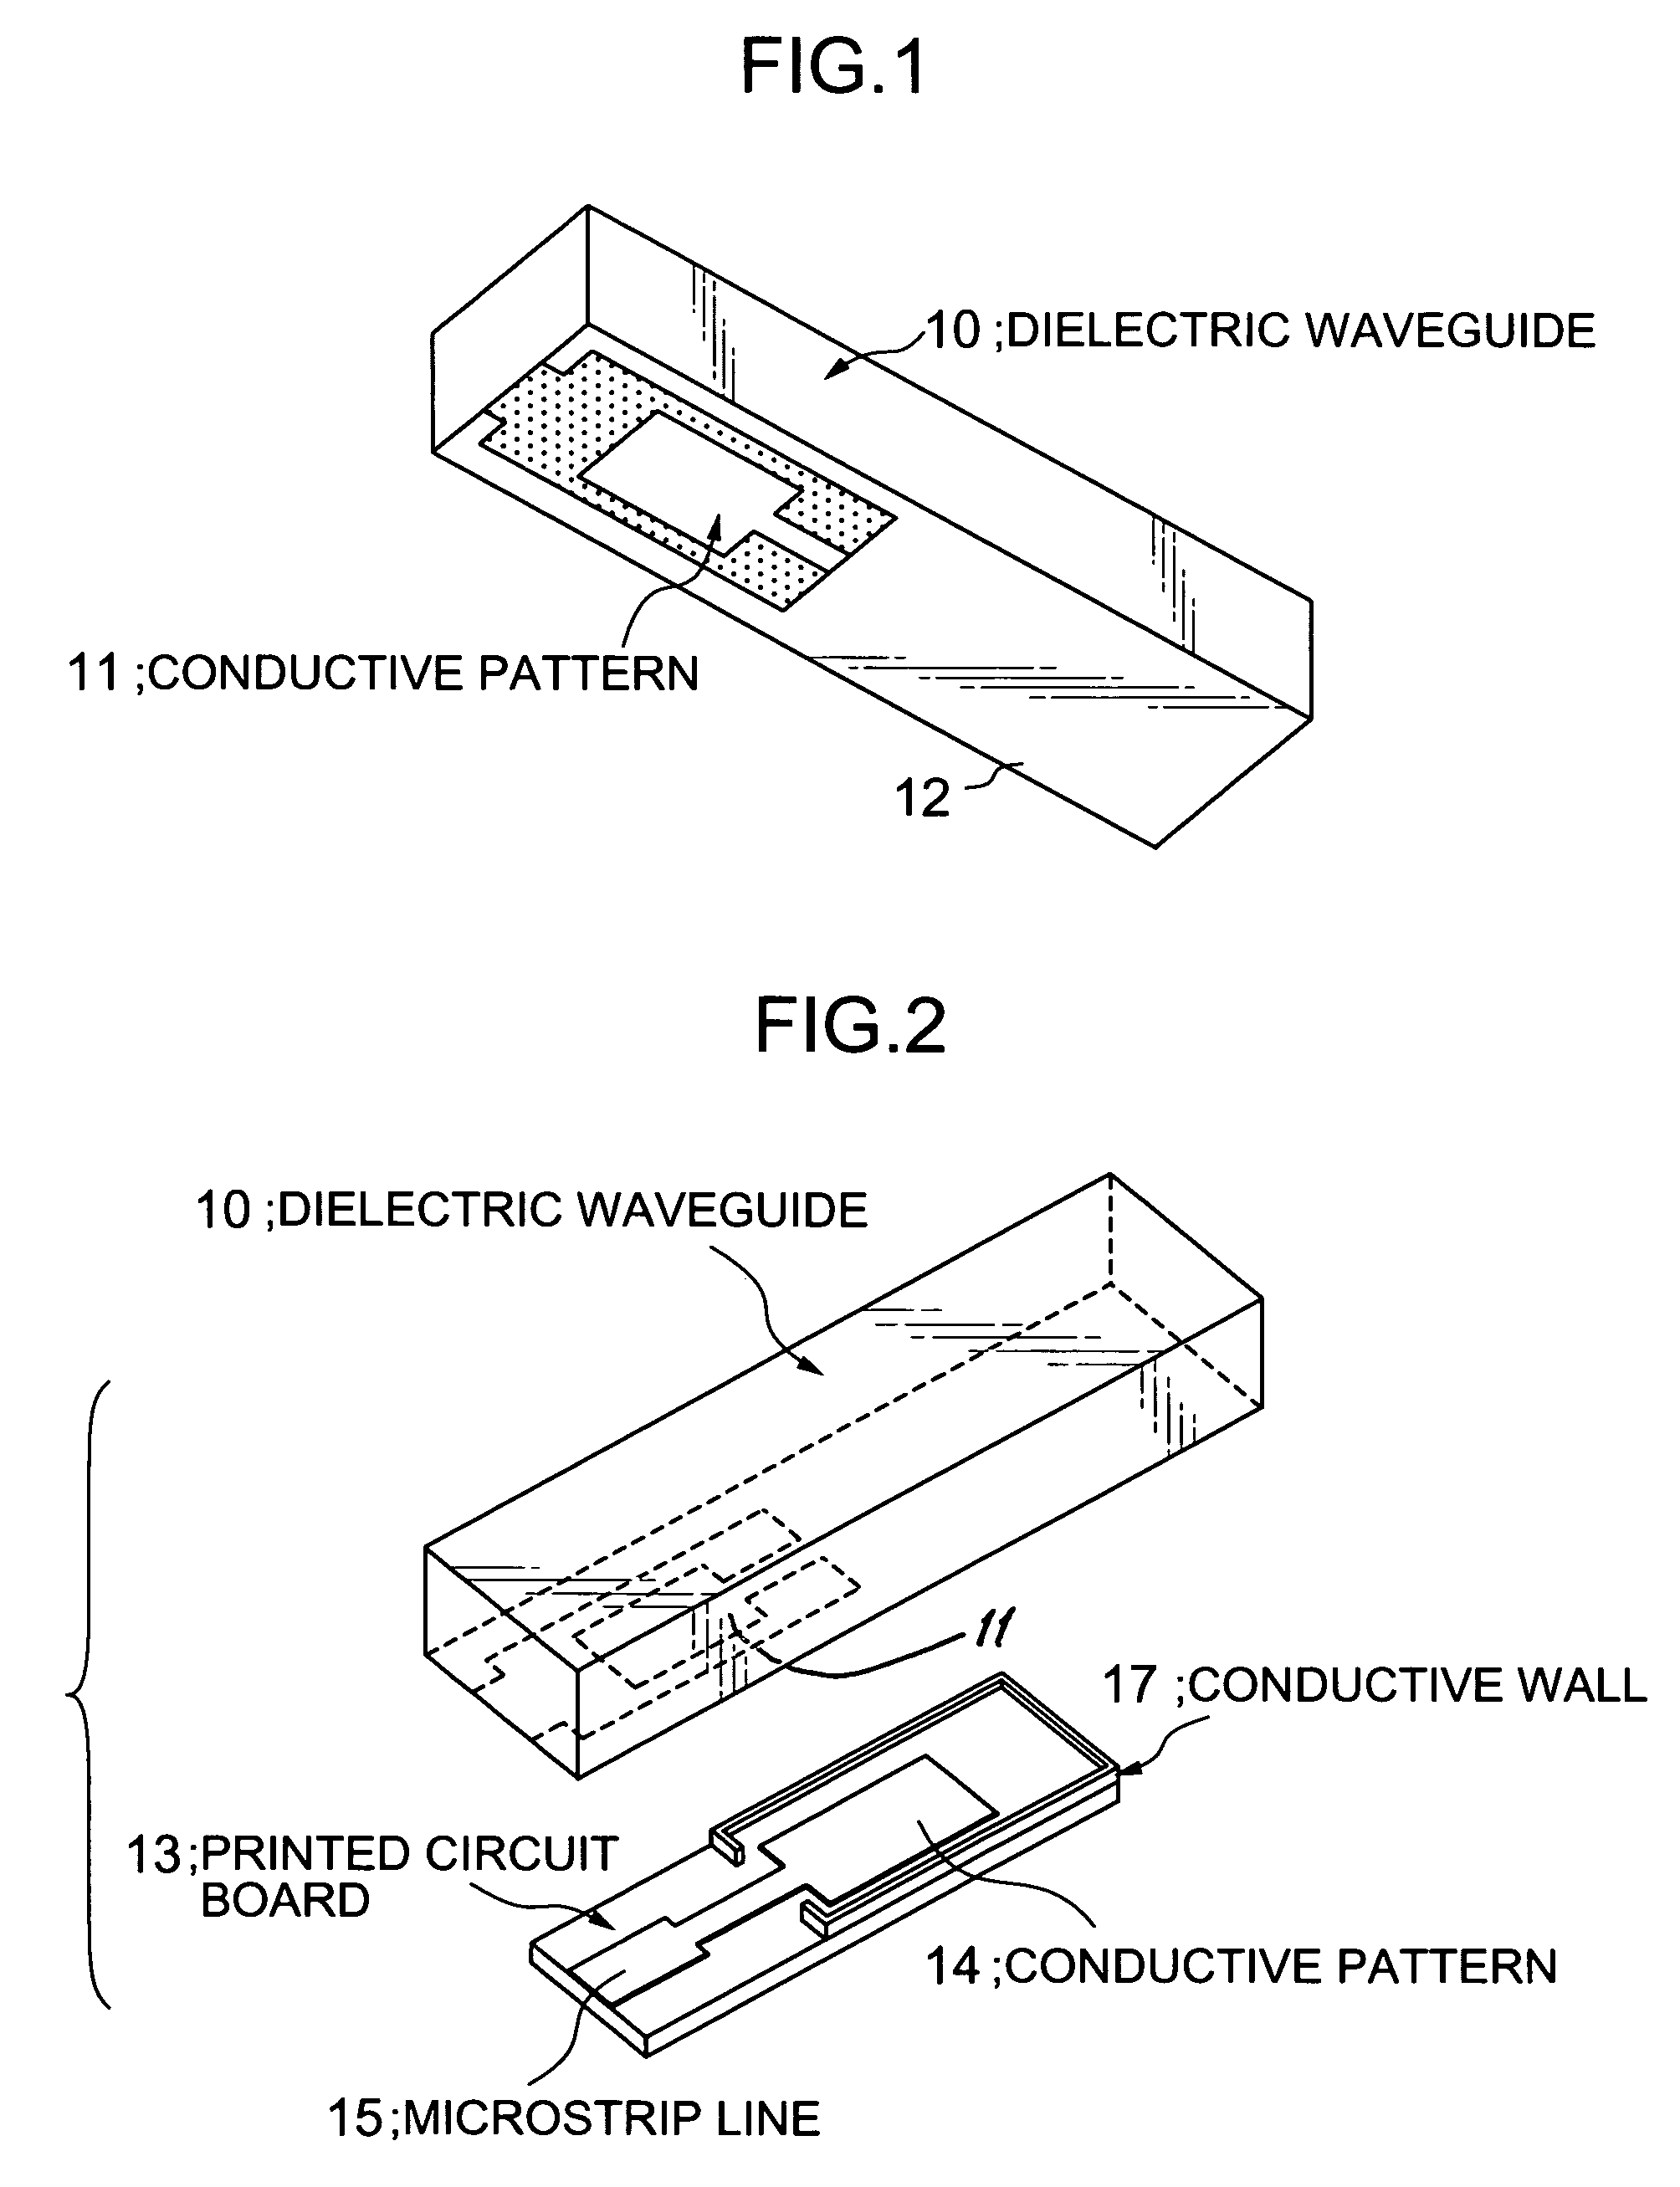 Input/output coupling structure for dielectric waveguide having conductive coupling patterns separated by a spacer